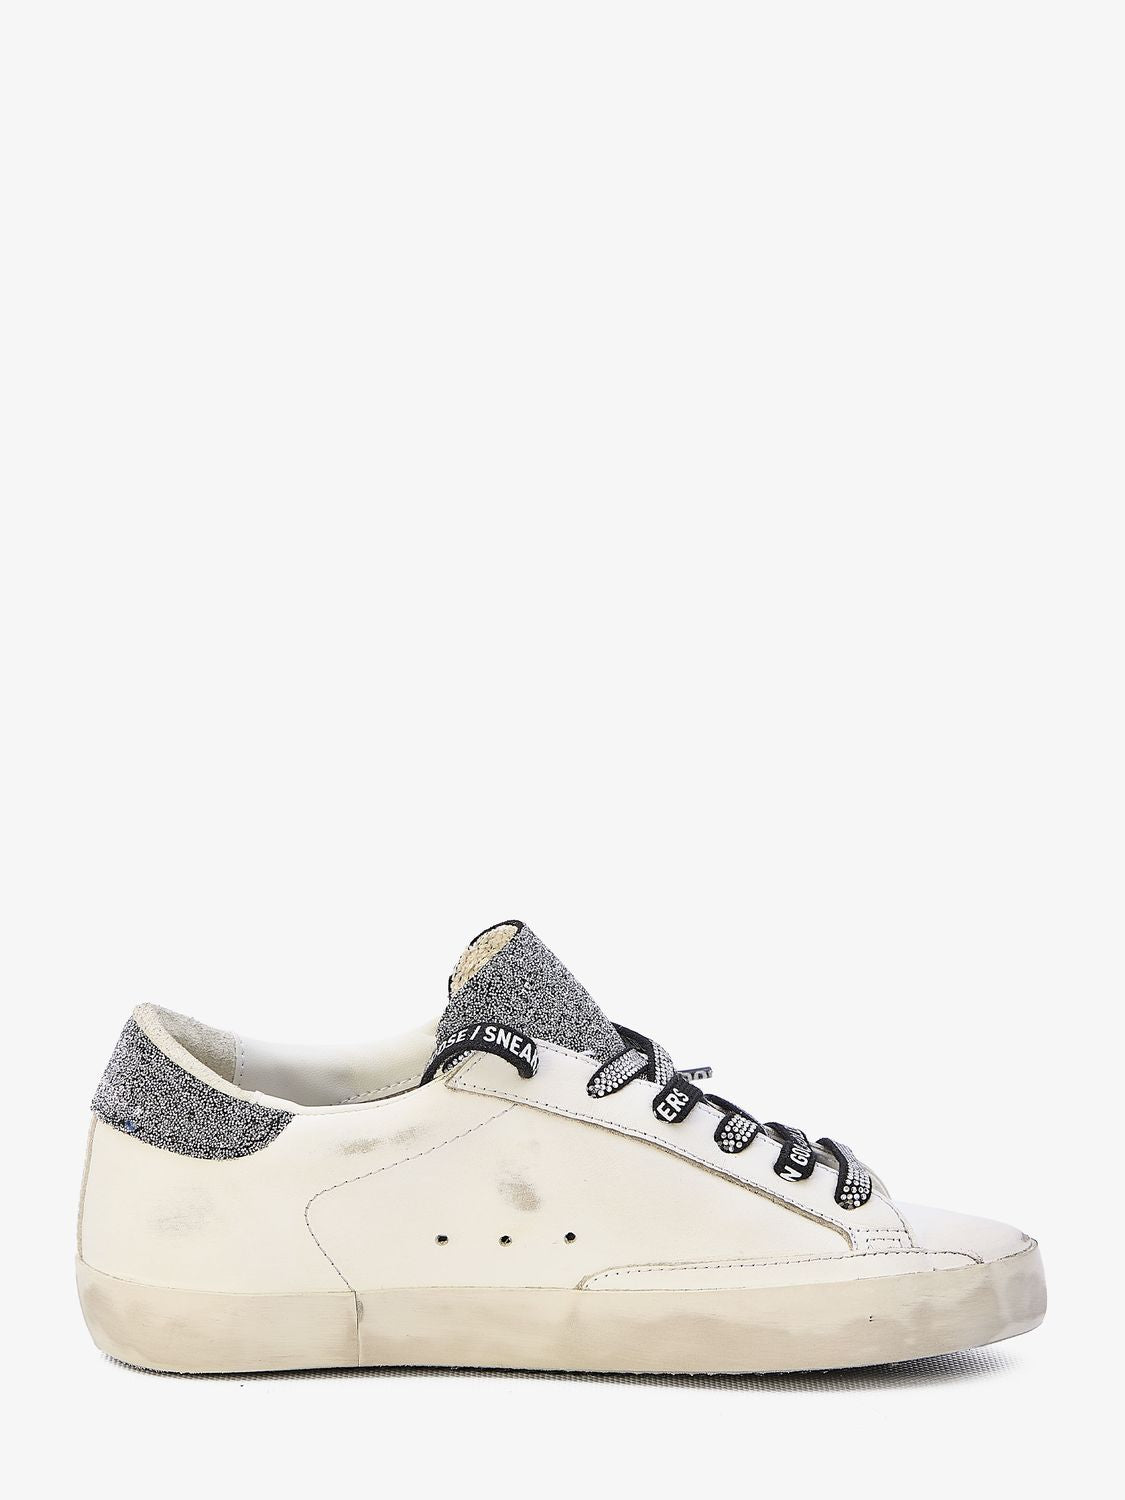 GOLDEN GOOSE Vintage White Leather Crystal Super-Star Sneakers for Women